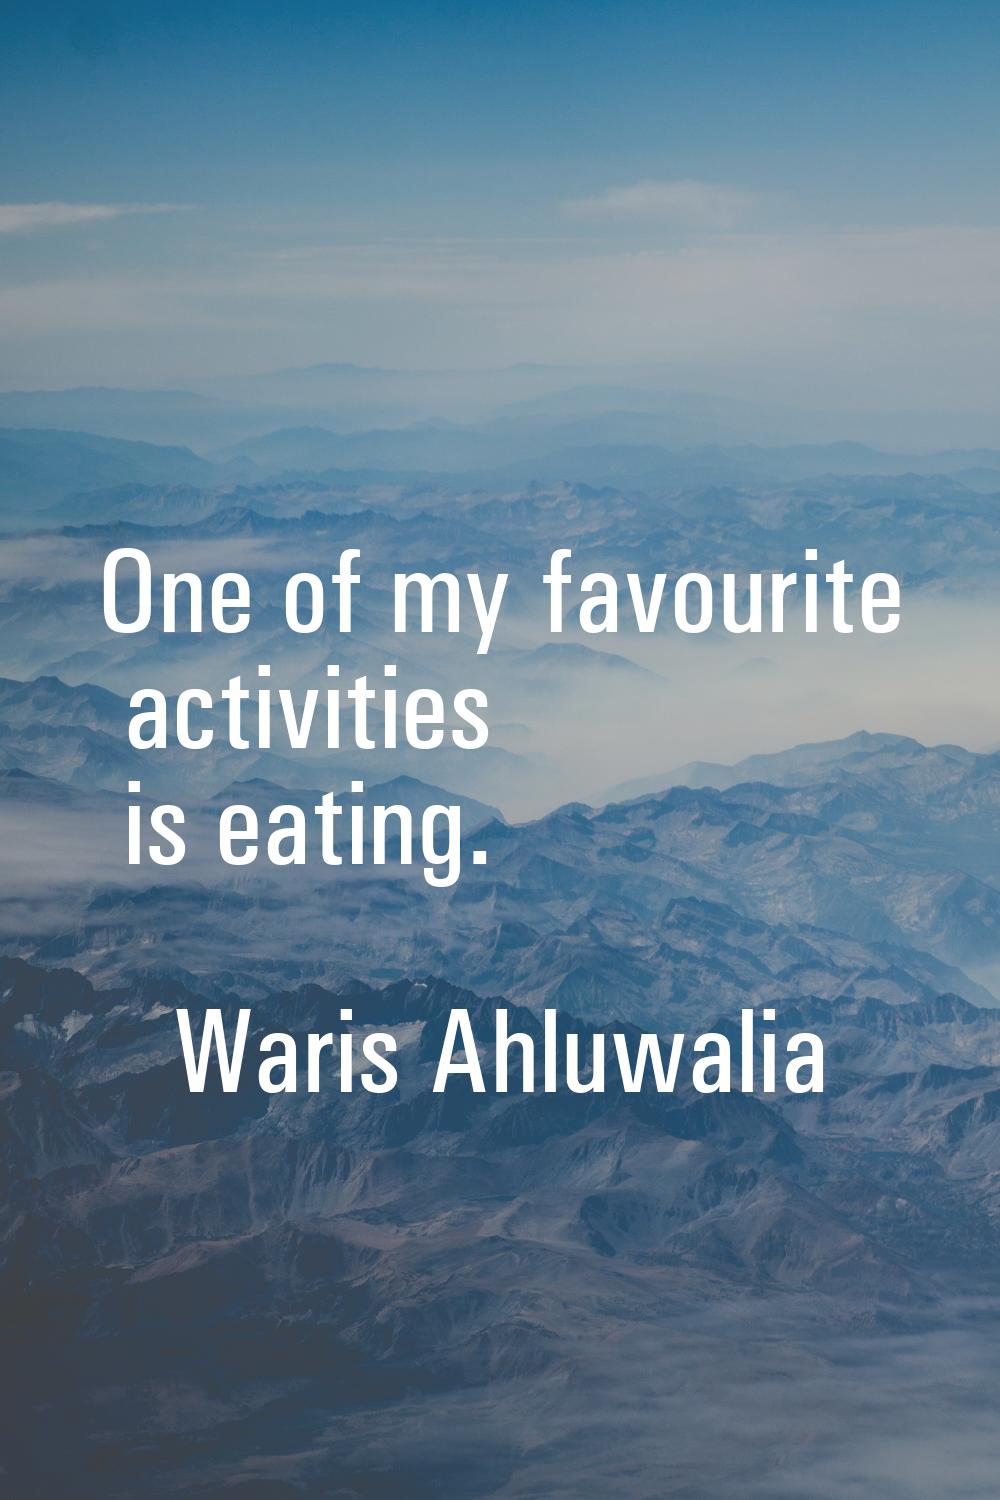 One of my favourite activities is eating.